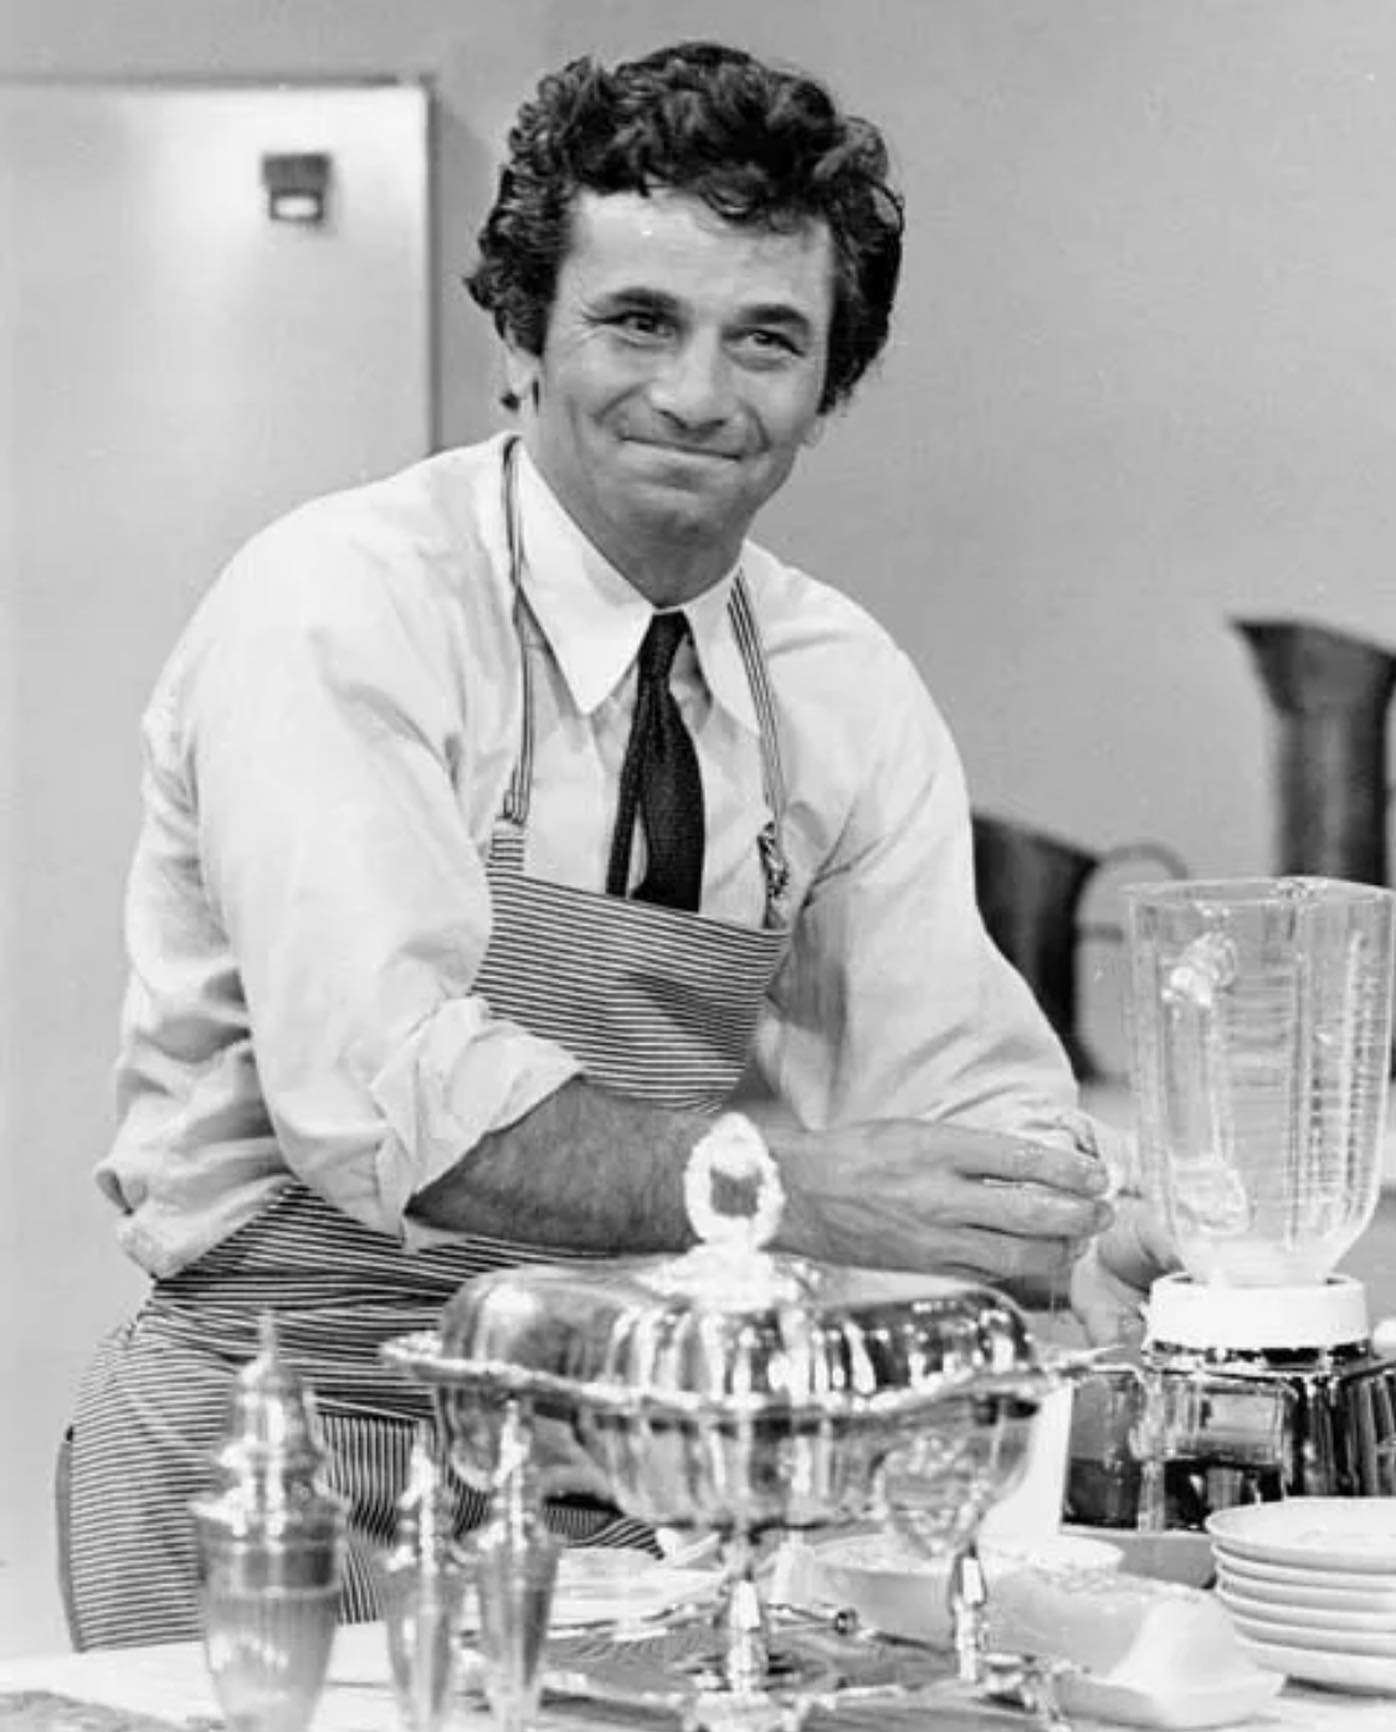 The world always seems a little brighter after watching #Columbo cooking in ‘Double Shock’ 🙂
—————————
#ltcolumbo #Columbo #peterfalk  #classictv #70s #1973